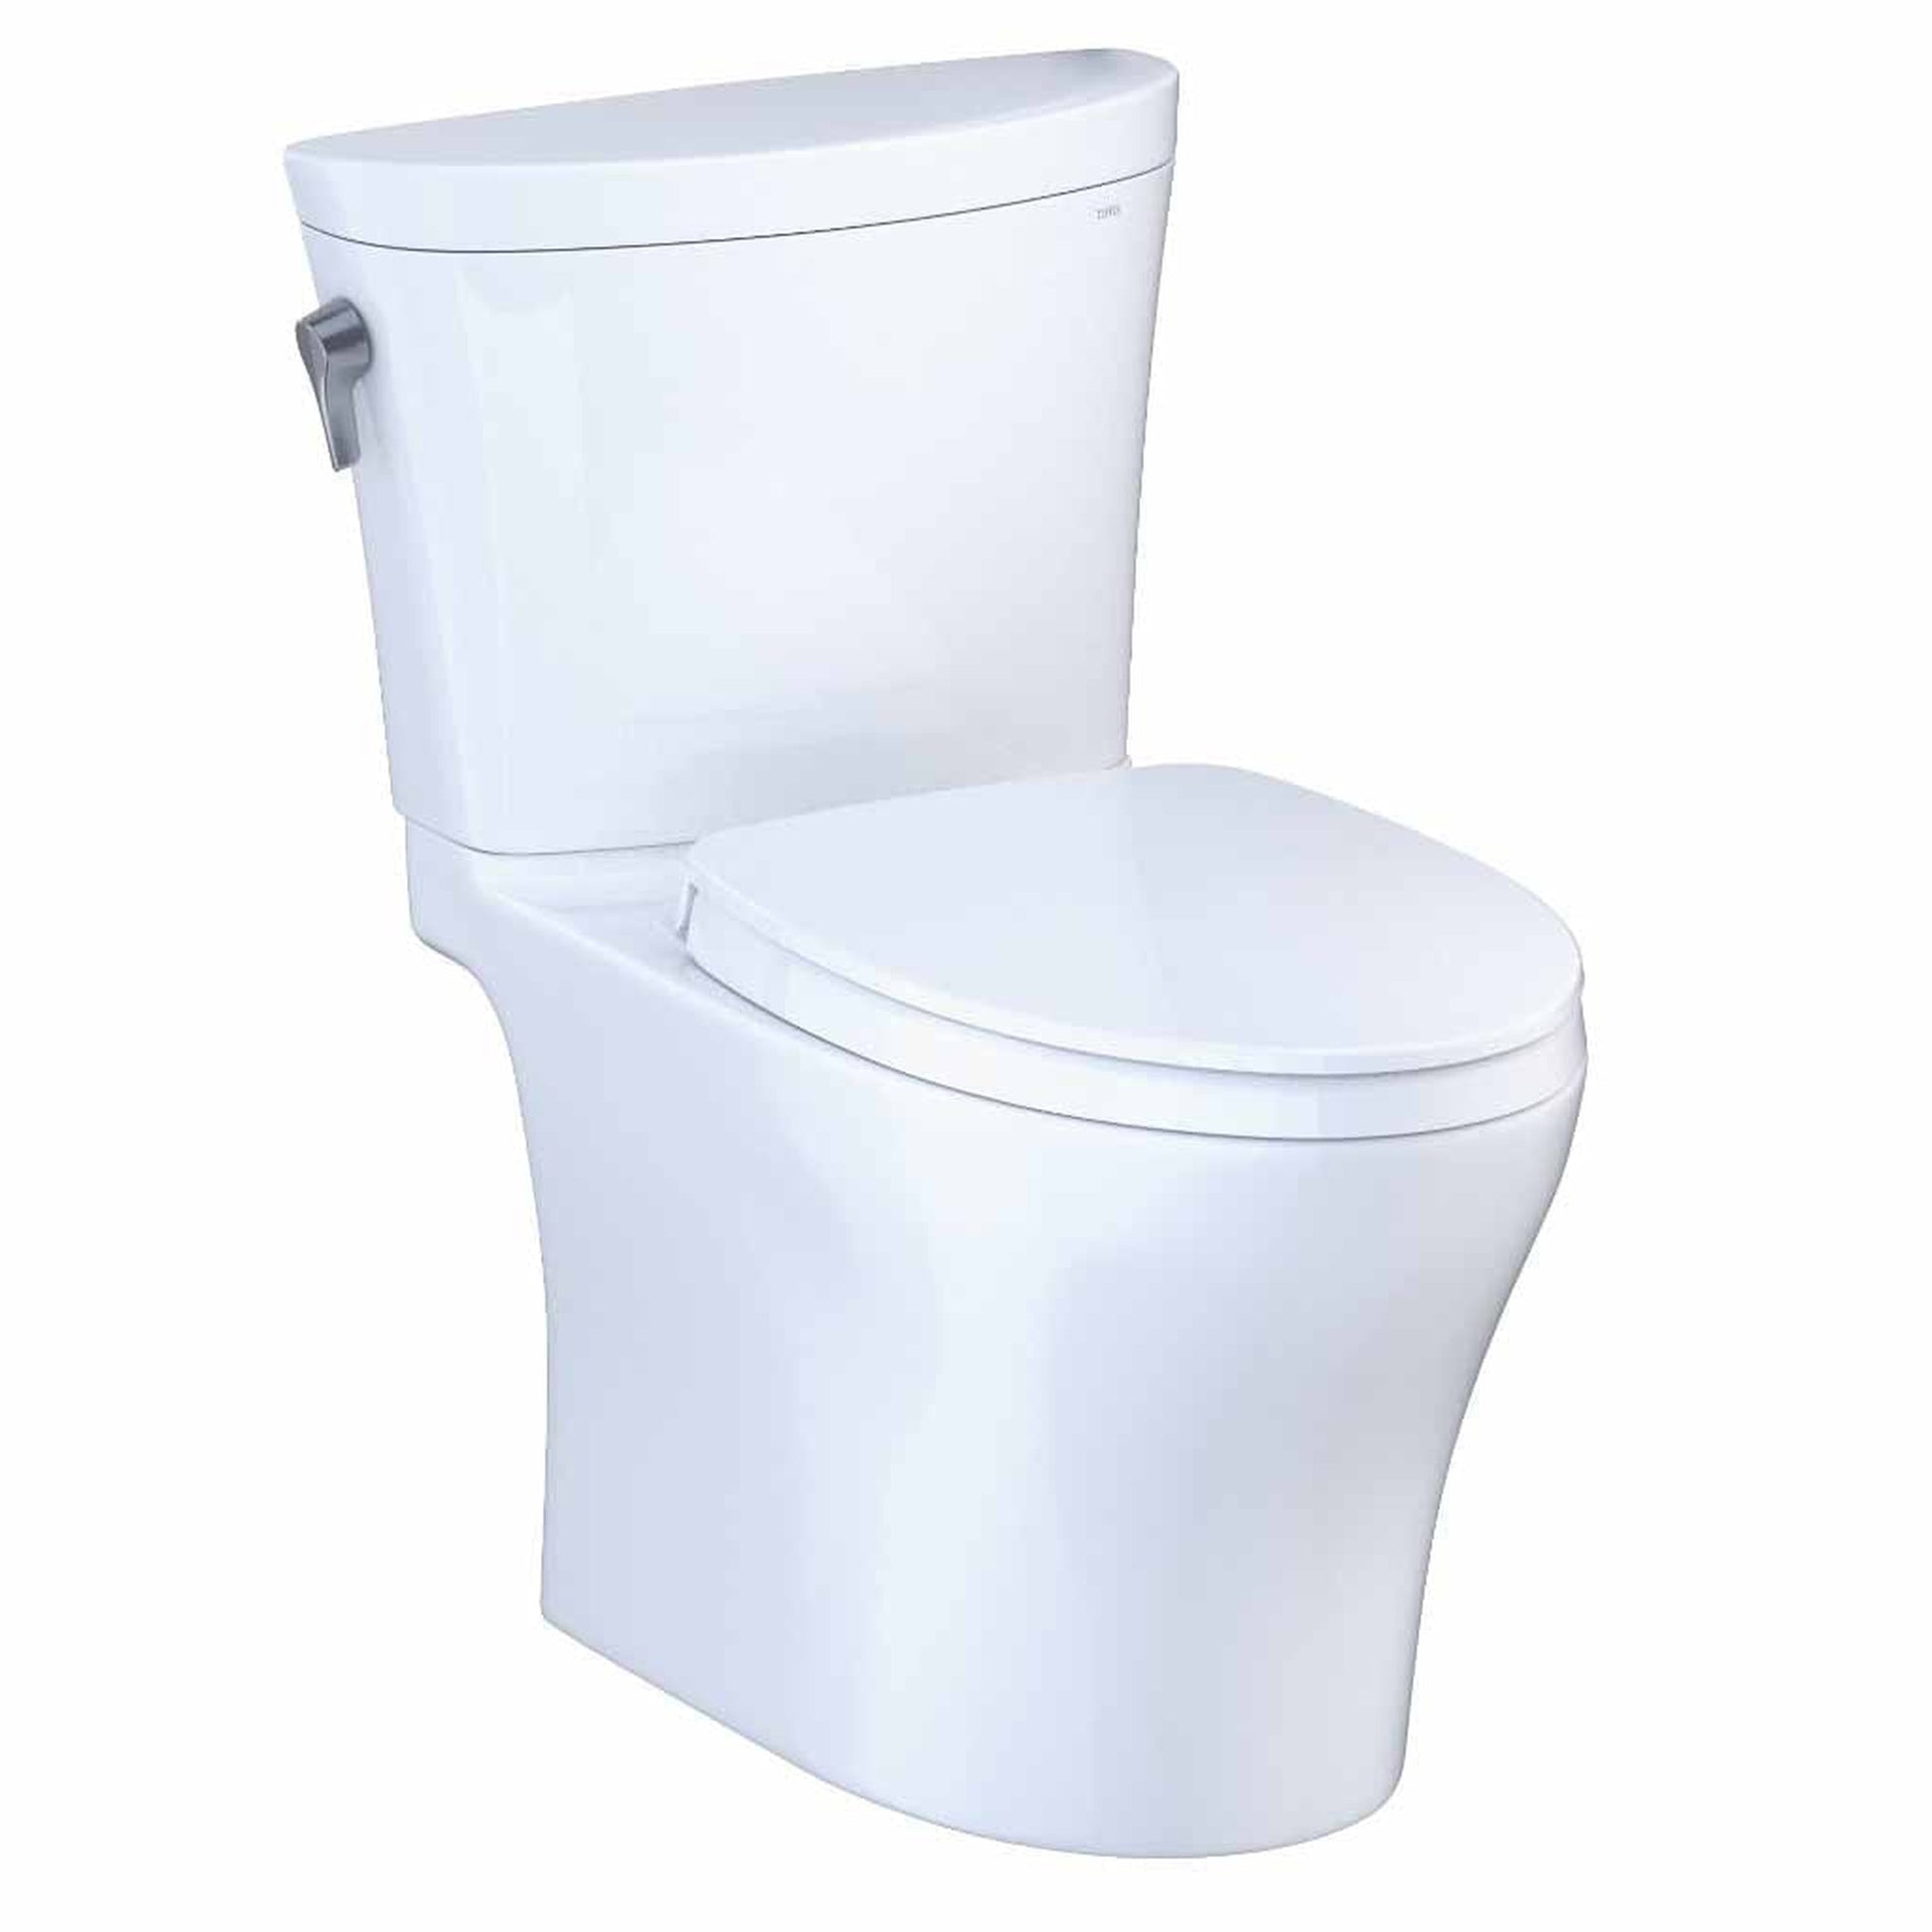 TOTO Aquia IV Arc Cotton White 1.28 GPF & 0.8 GPF Dual-Flush Two-Piece Elongated Toilet With WASHLET+ Connection - SoftClose Seat Included